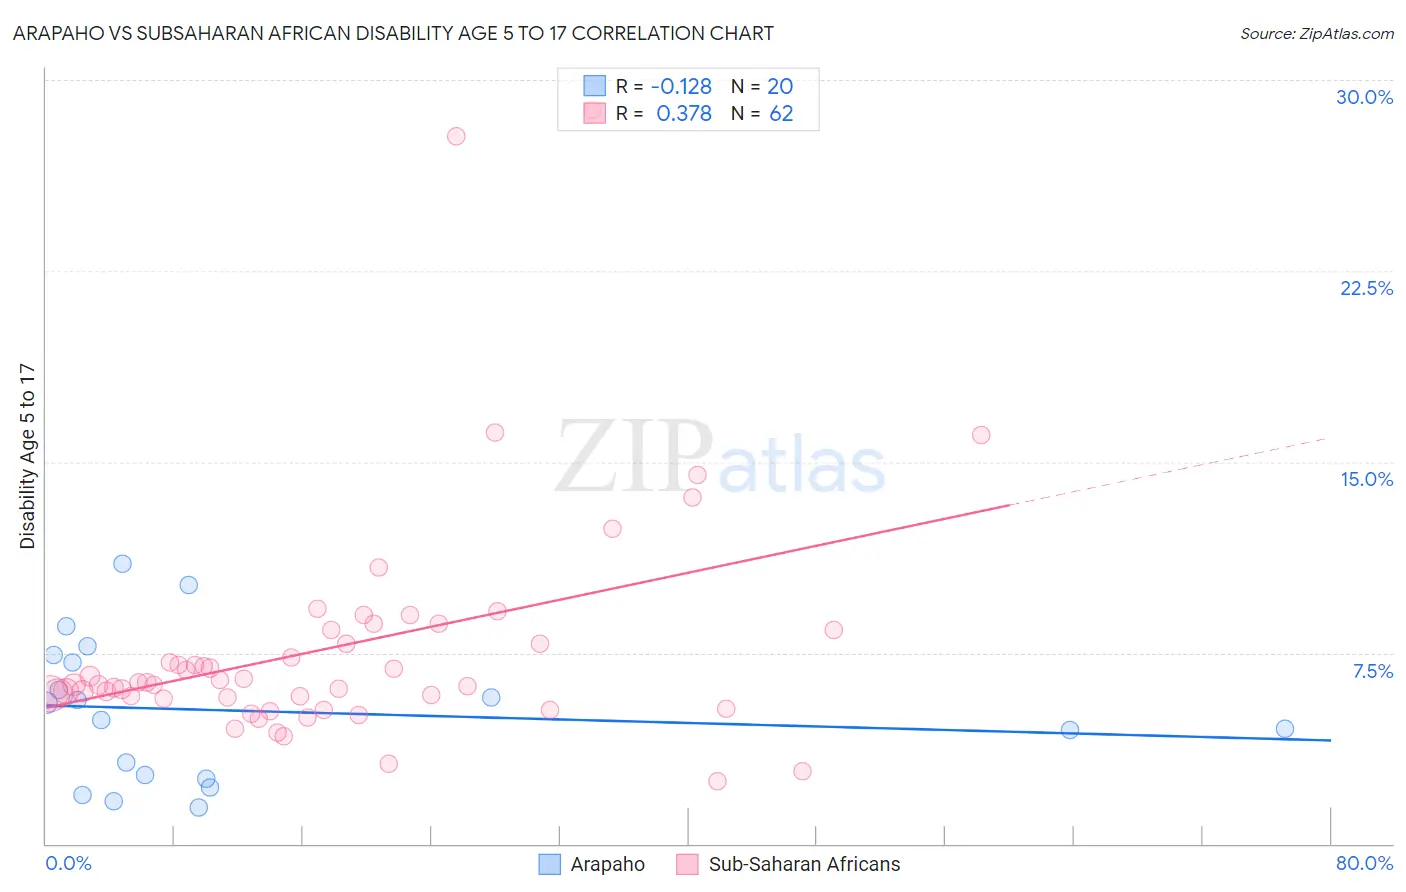 Arapaho vs Subsaharan African Disability Age 5 to 17